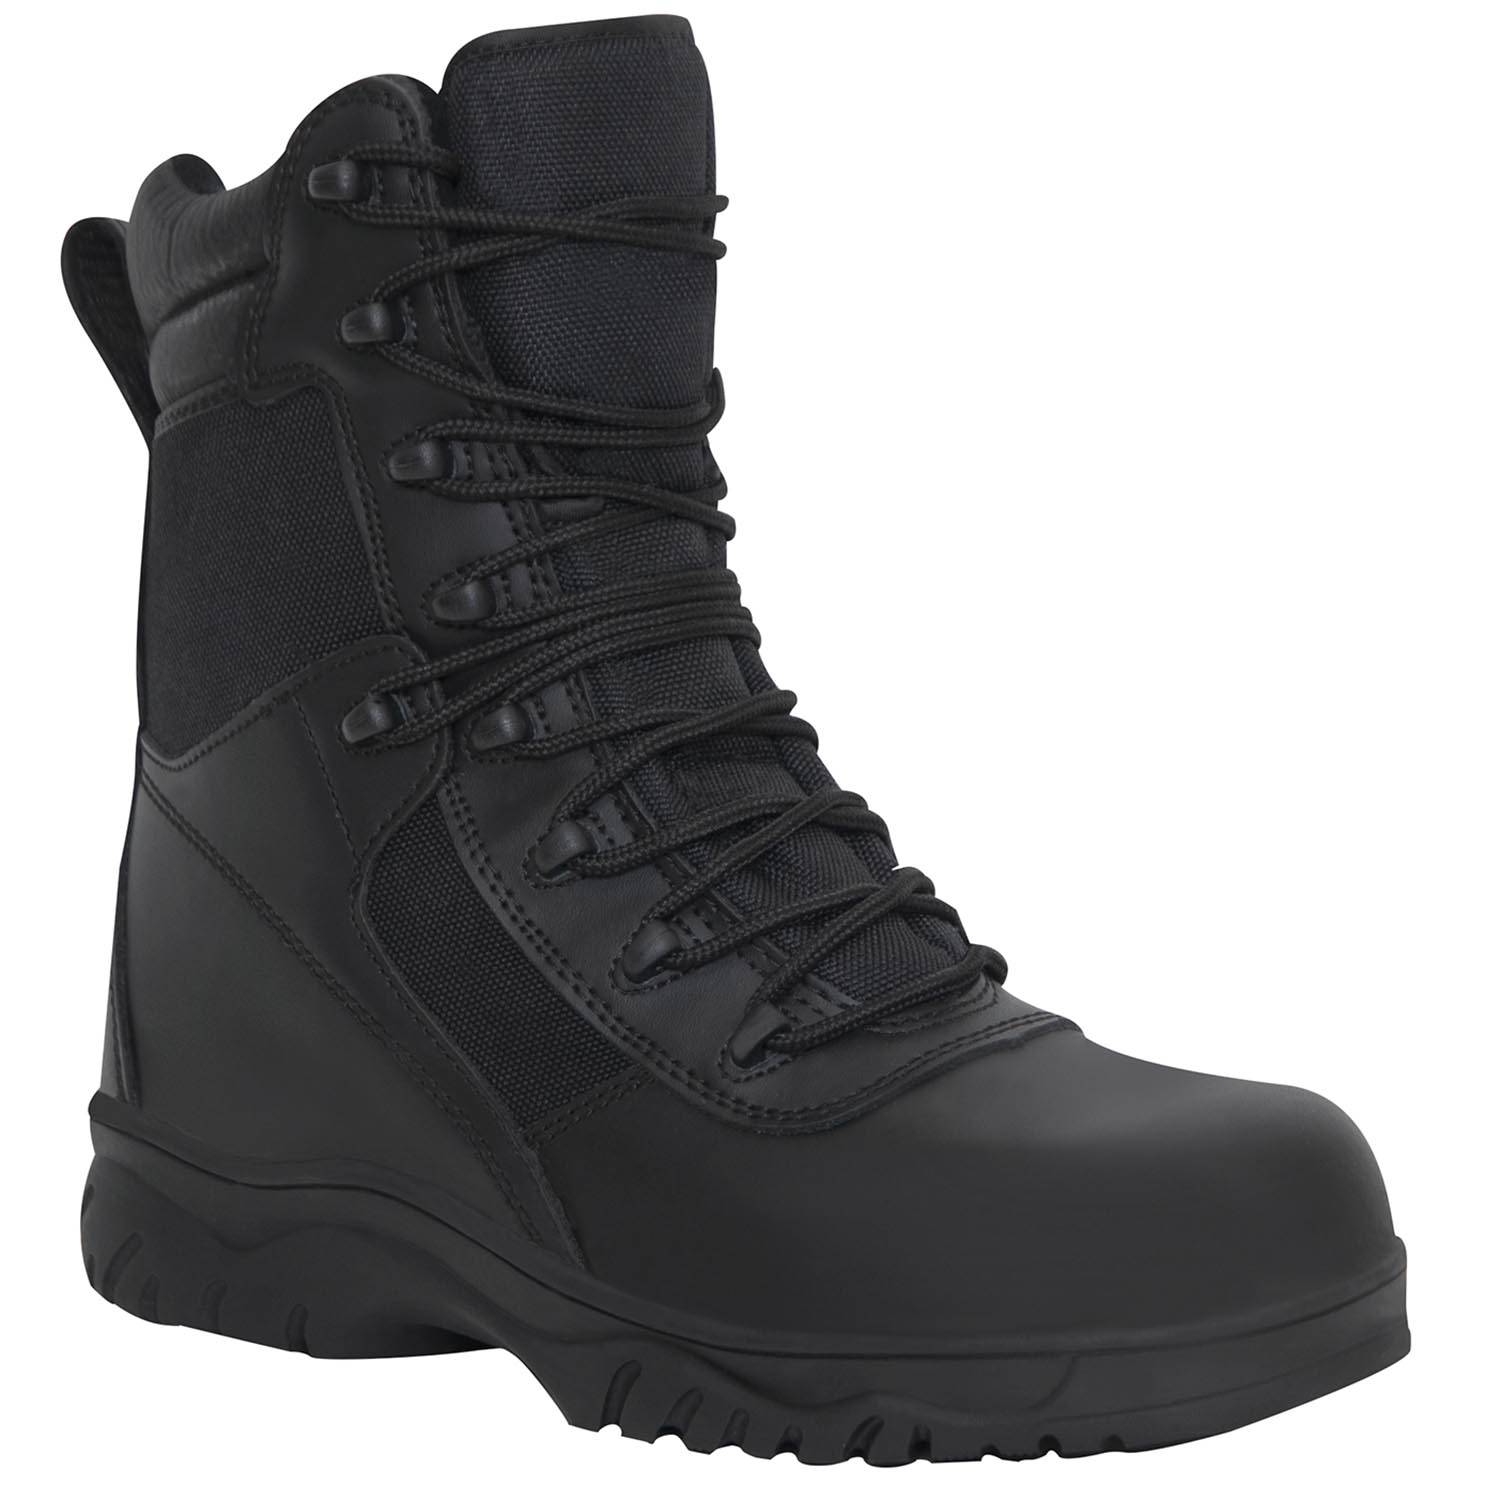 Rothco Forced Entry 8" Side-Zip Composite Toe Boots